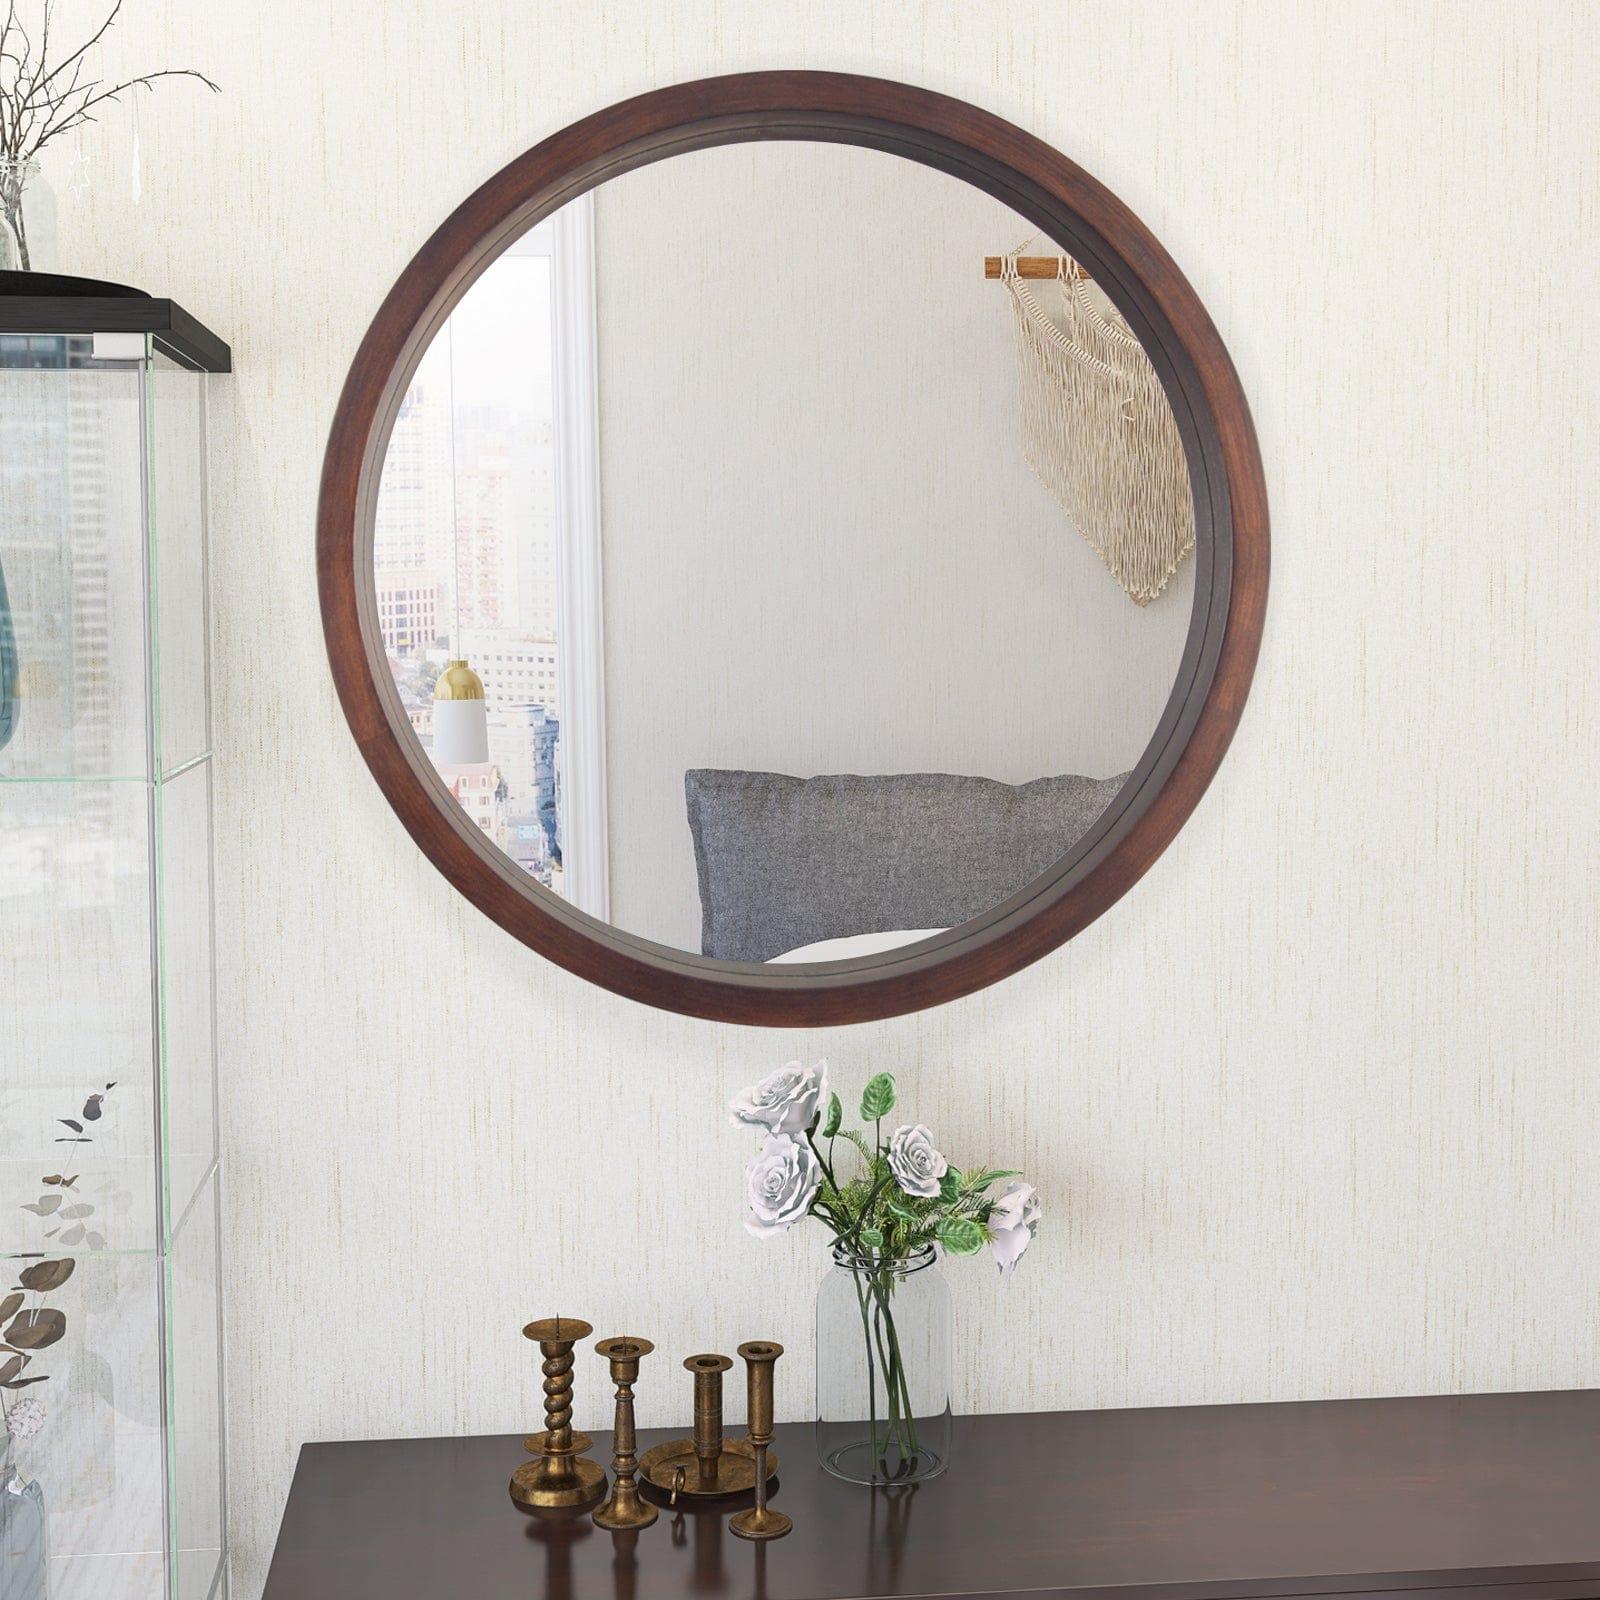 Shop Circle Mirror with Wood Frame, Round Modern Decoration Large Mirror for Bathroom Living Room Bedroom Entryway, Walnut Brown, 24" Mademoiselle Home Decor